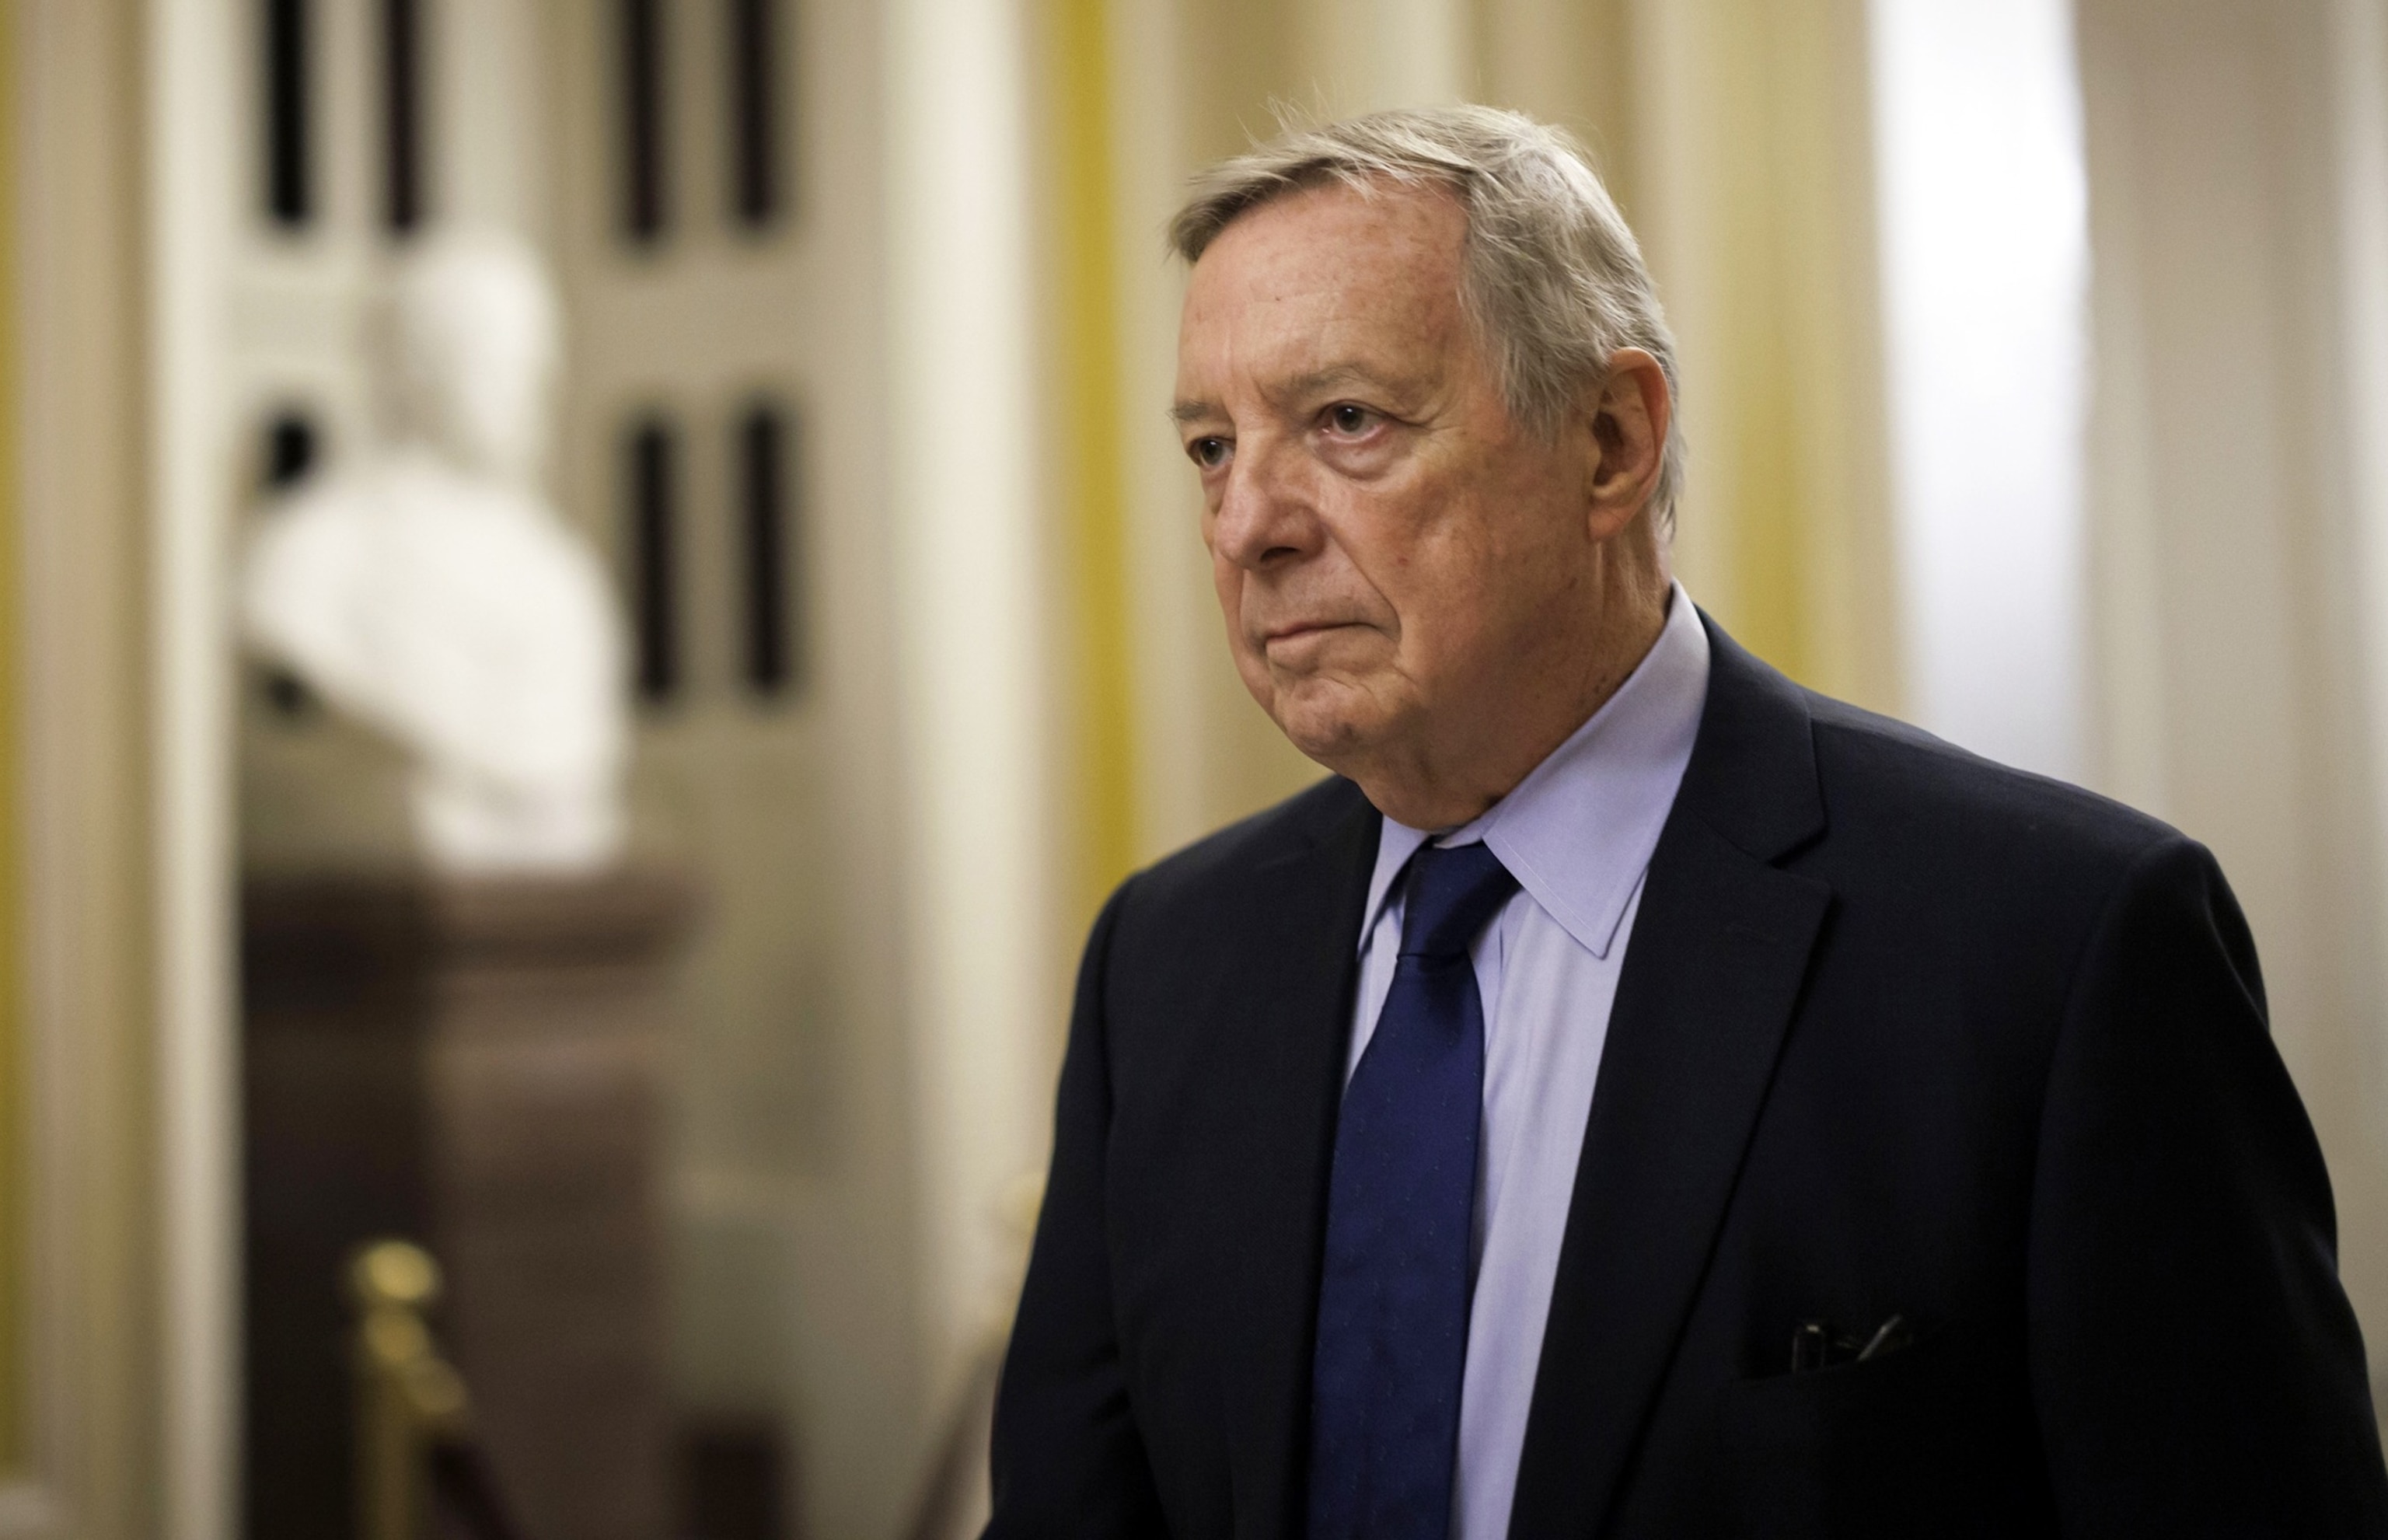 PHOTO: In this June 1, 2023, file photo, Senate Majority Whip Dick Durbin is shown at the US Capitol, in Washington, D.C.